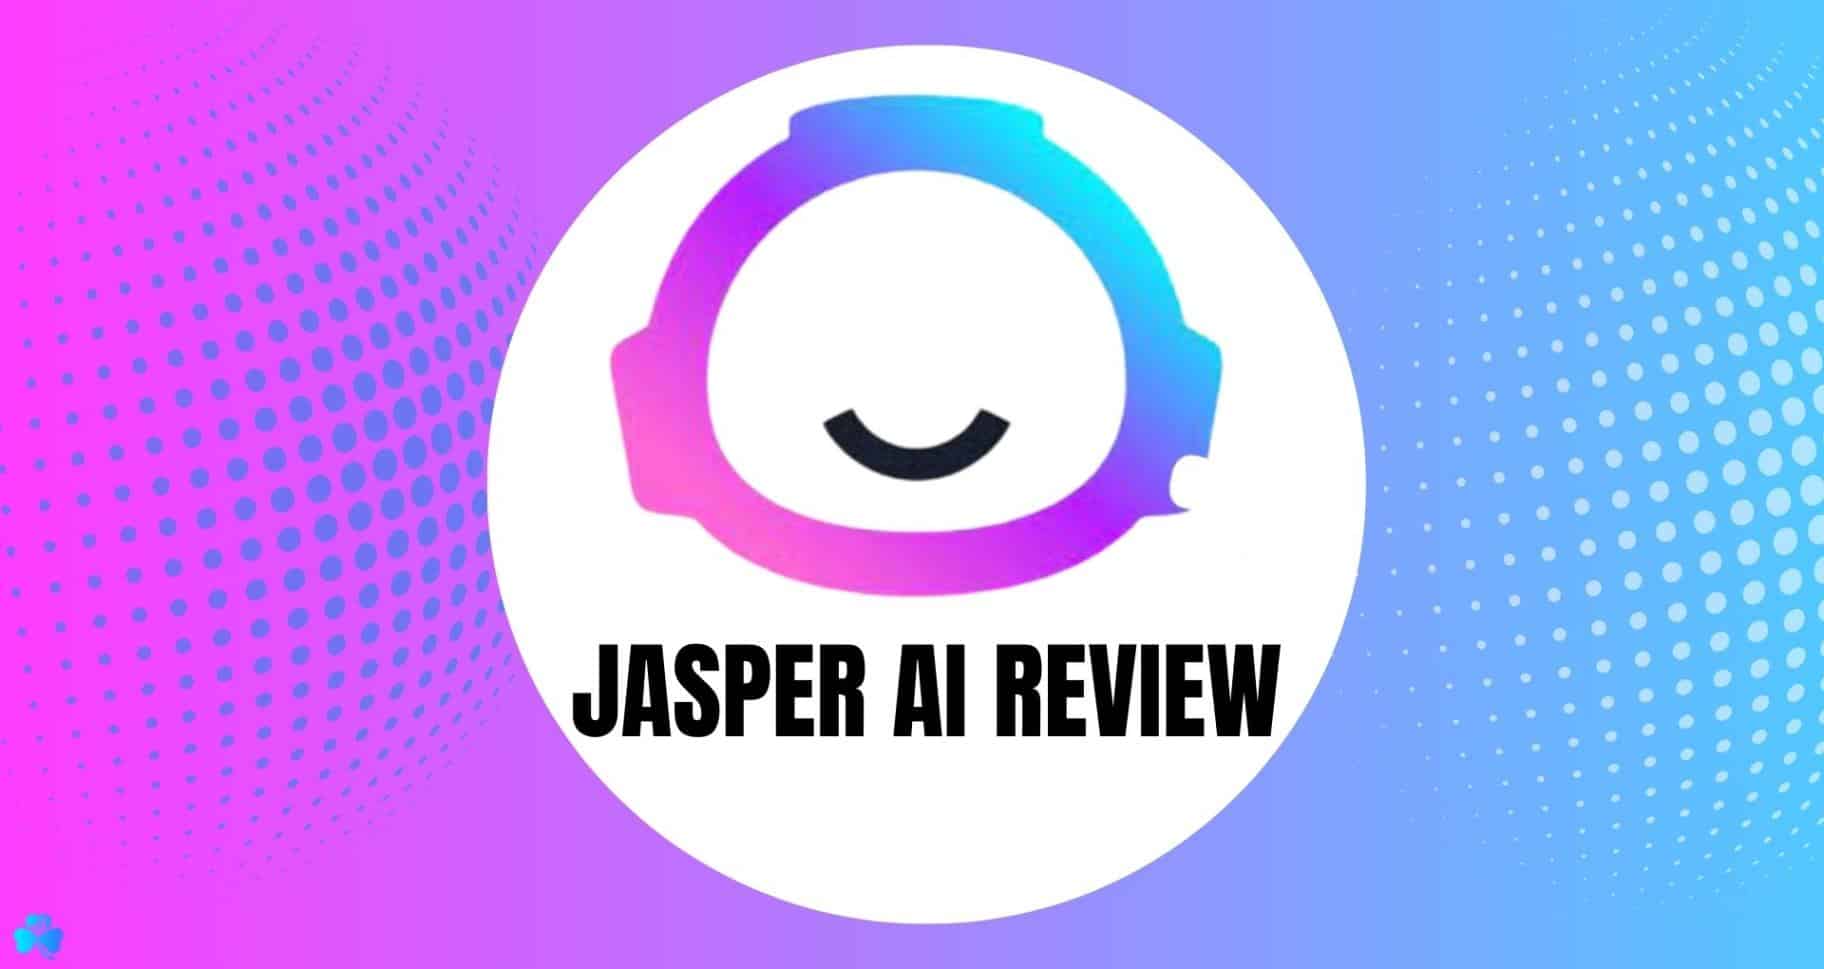 Jasper review featured image